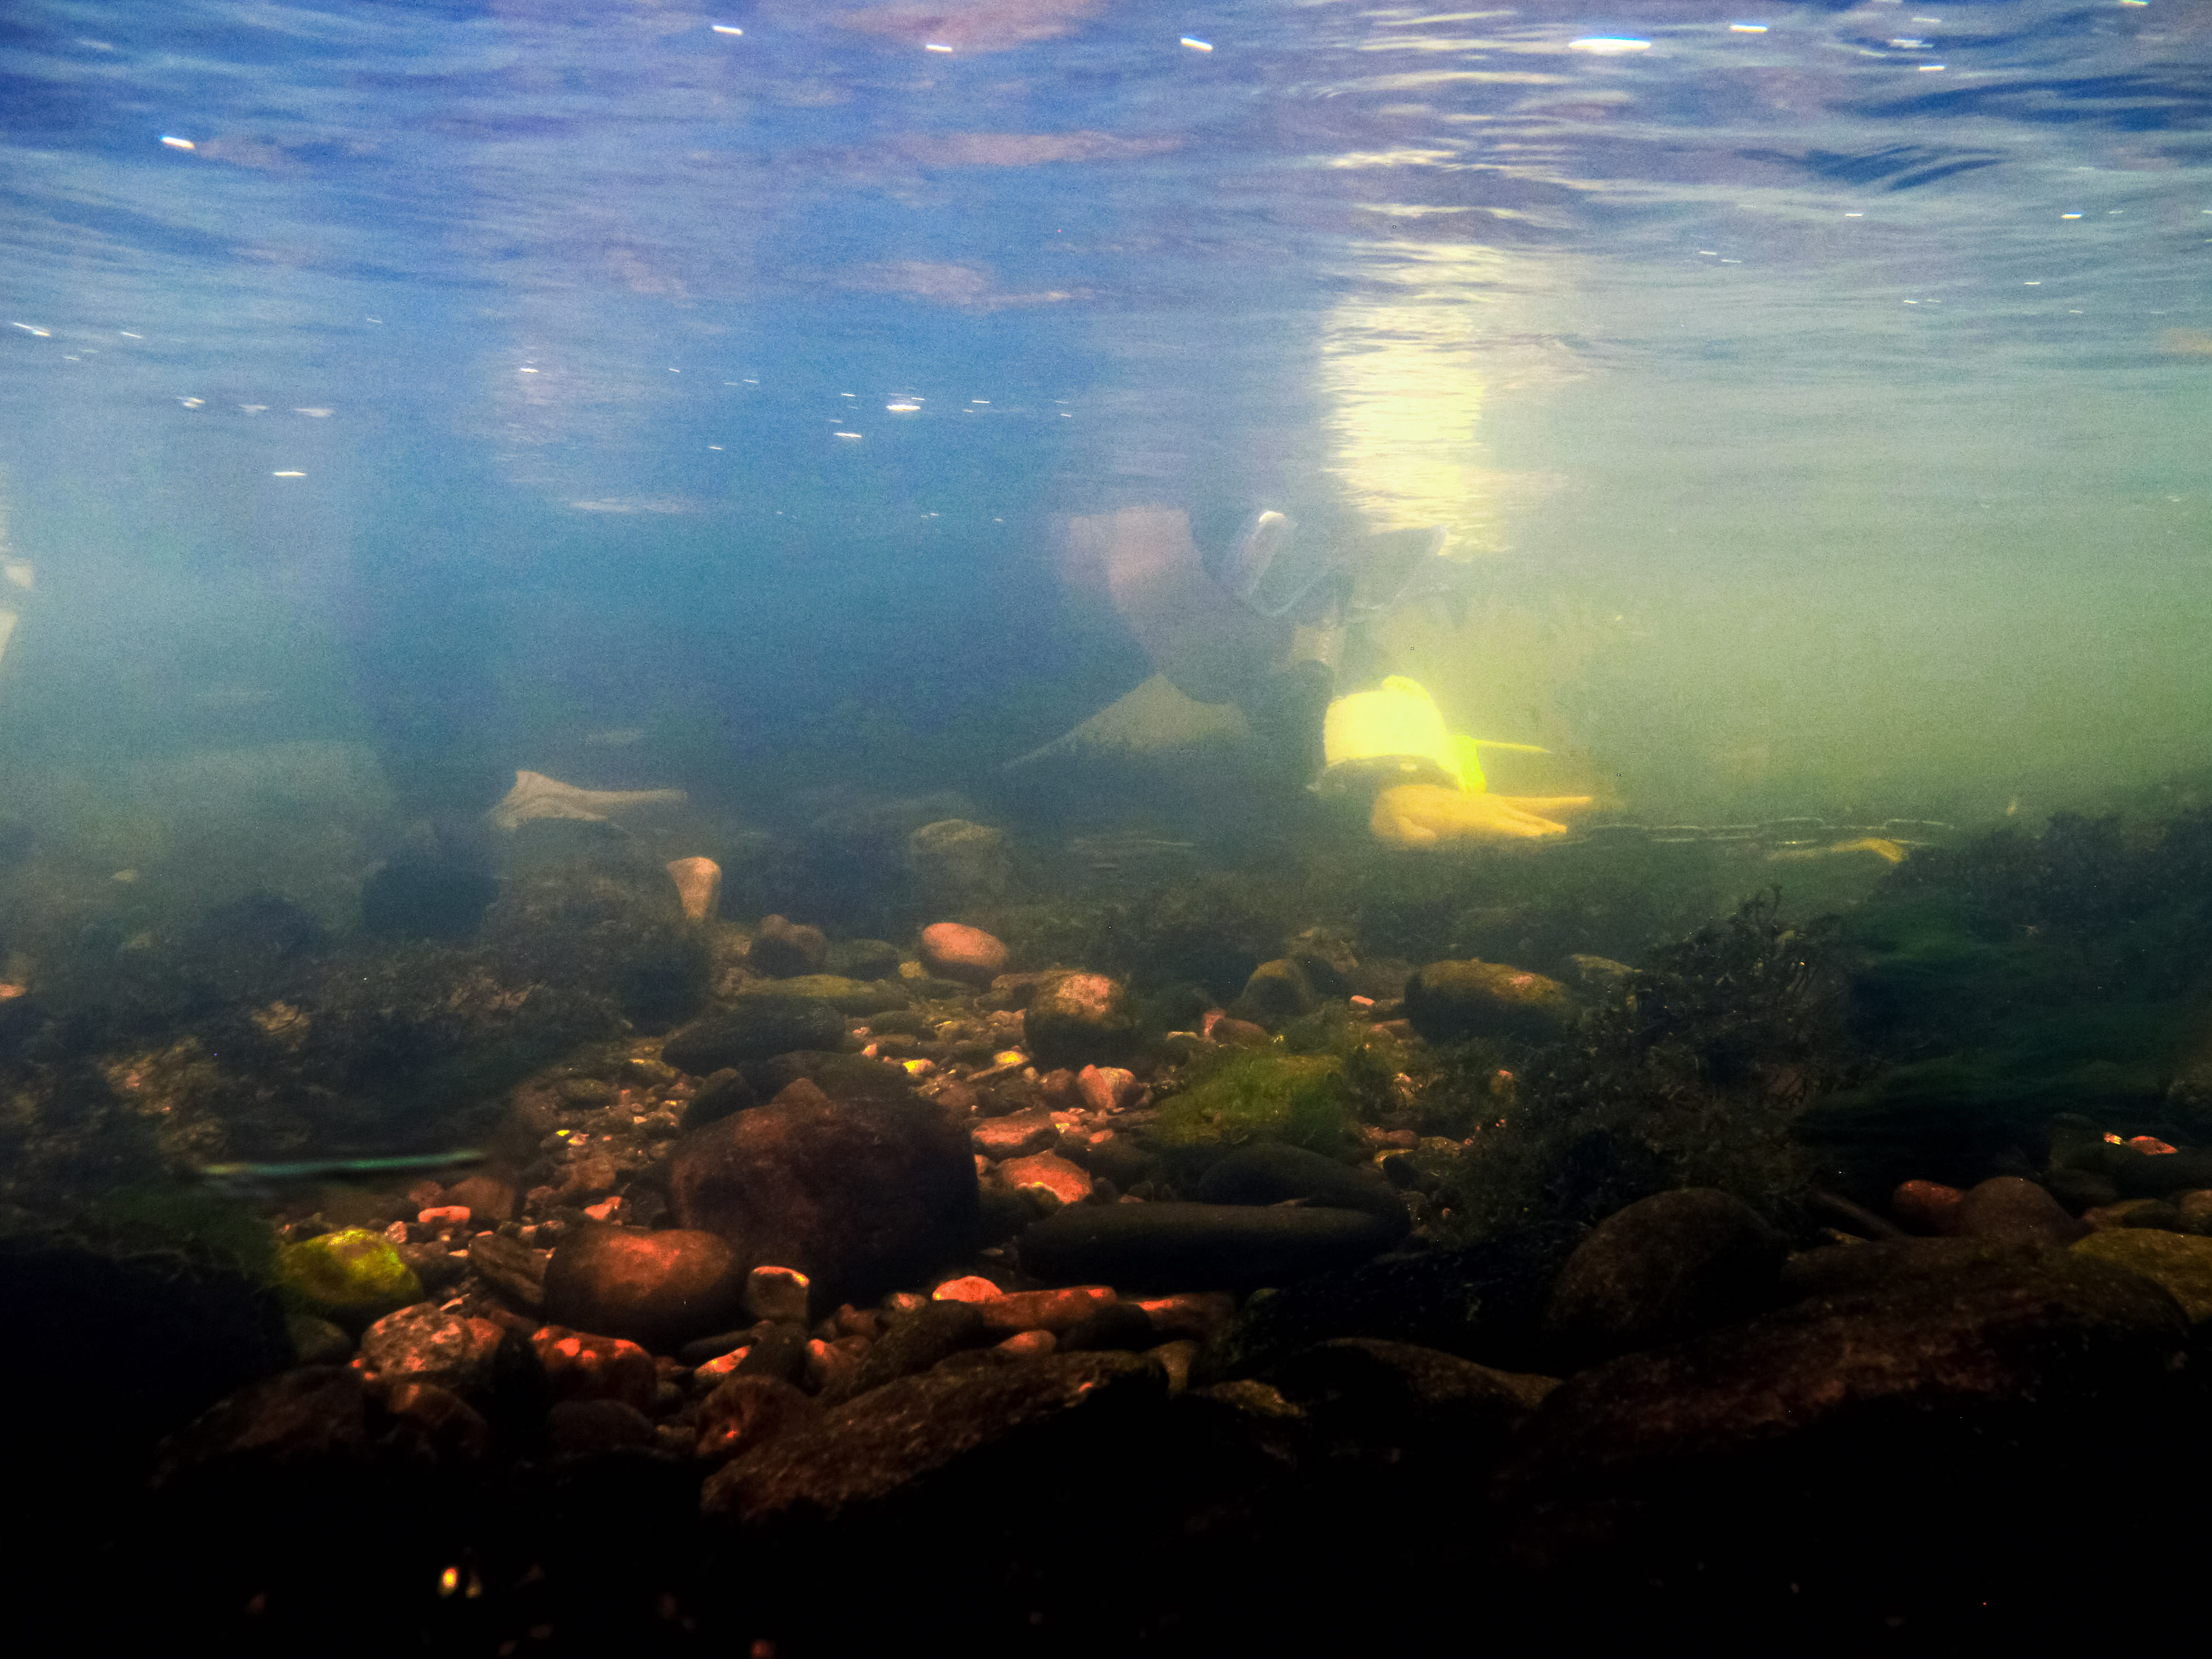 underwater view of a researcher snorkeling along the bottom of the river